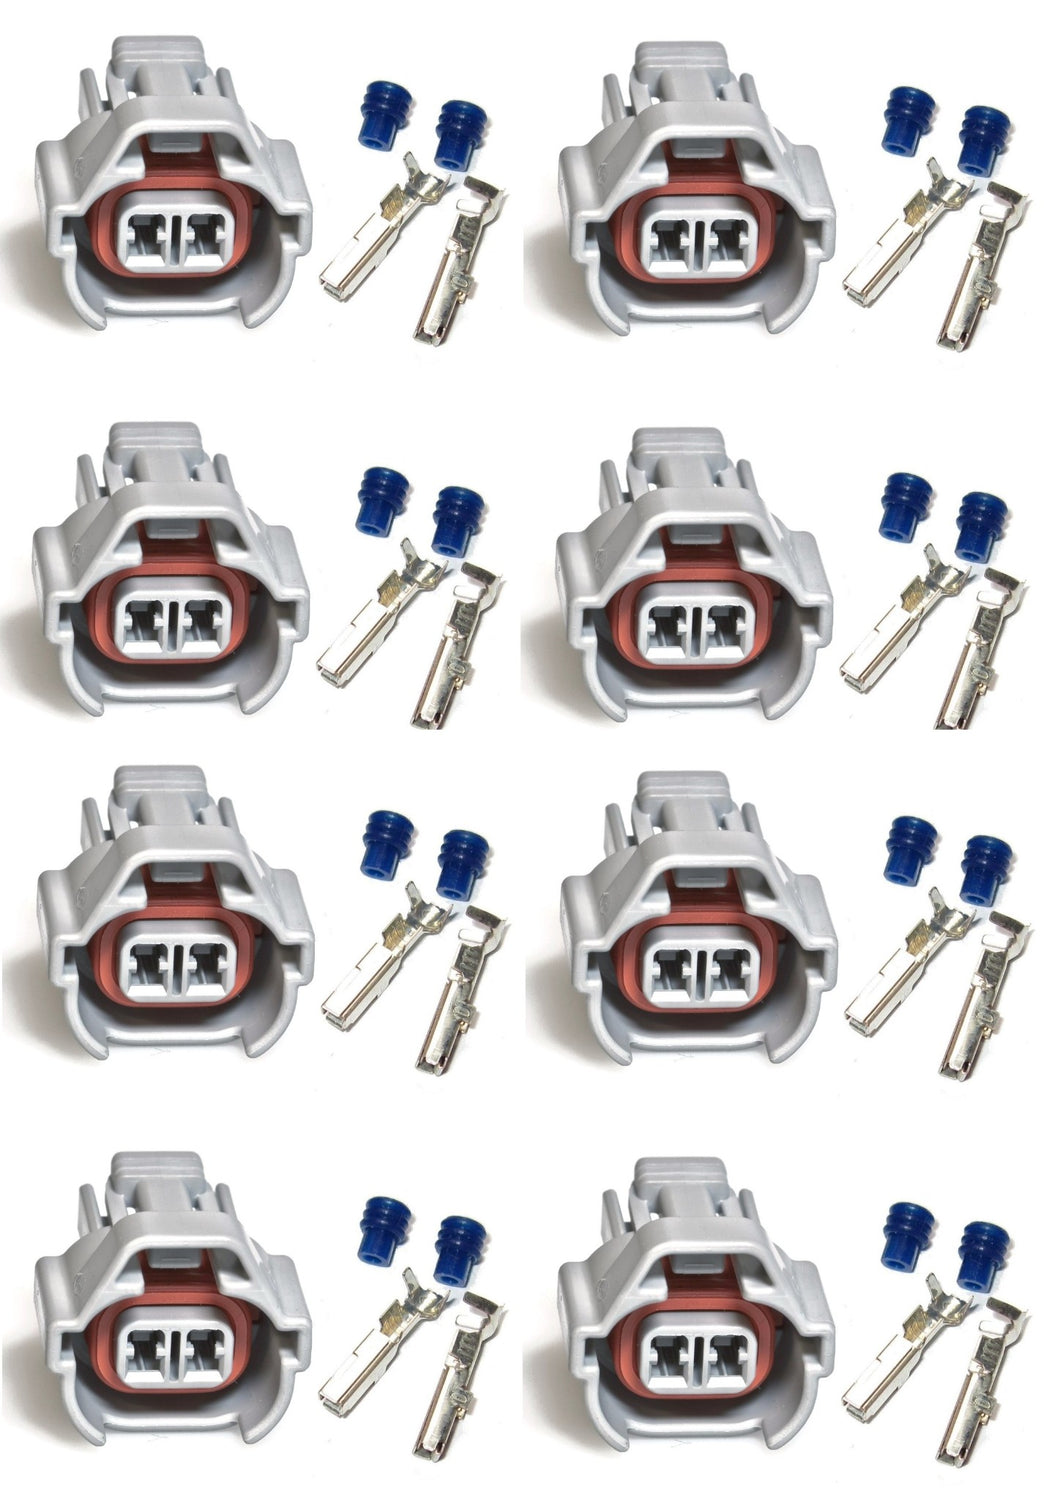 8 x Hi High Key Injector Plug for Injector Connector fo Toyota Denso etc